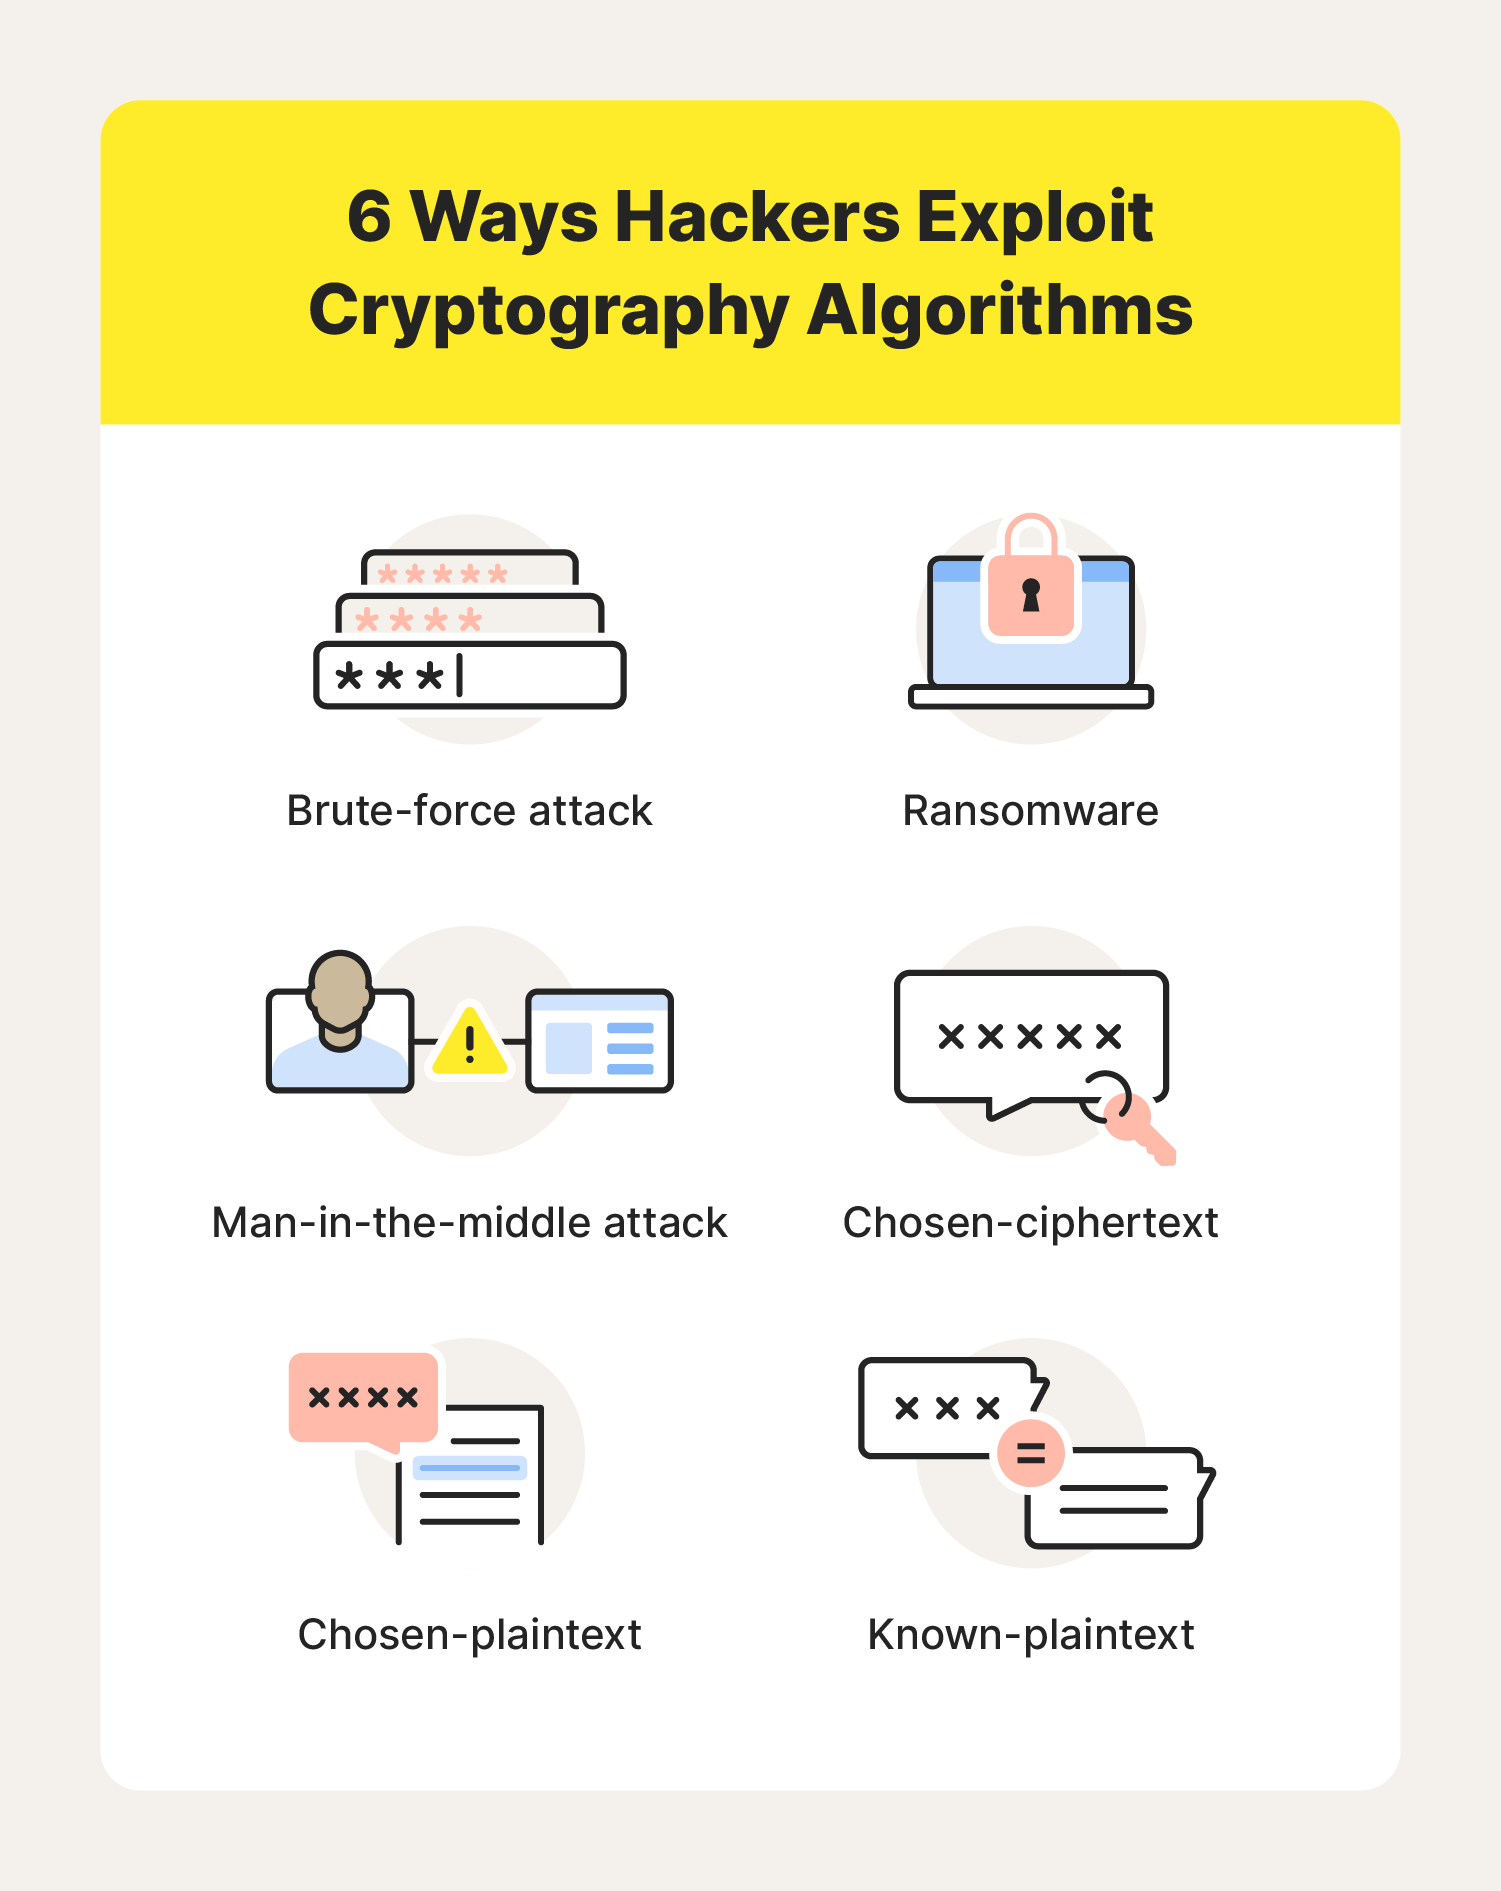 A list of the six primary tactics hackers use to exploit cryptography algorithms.